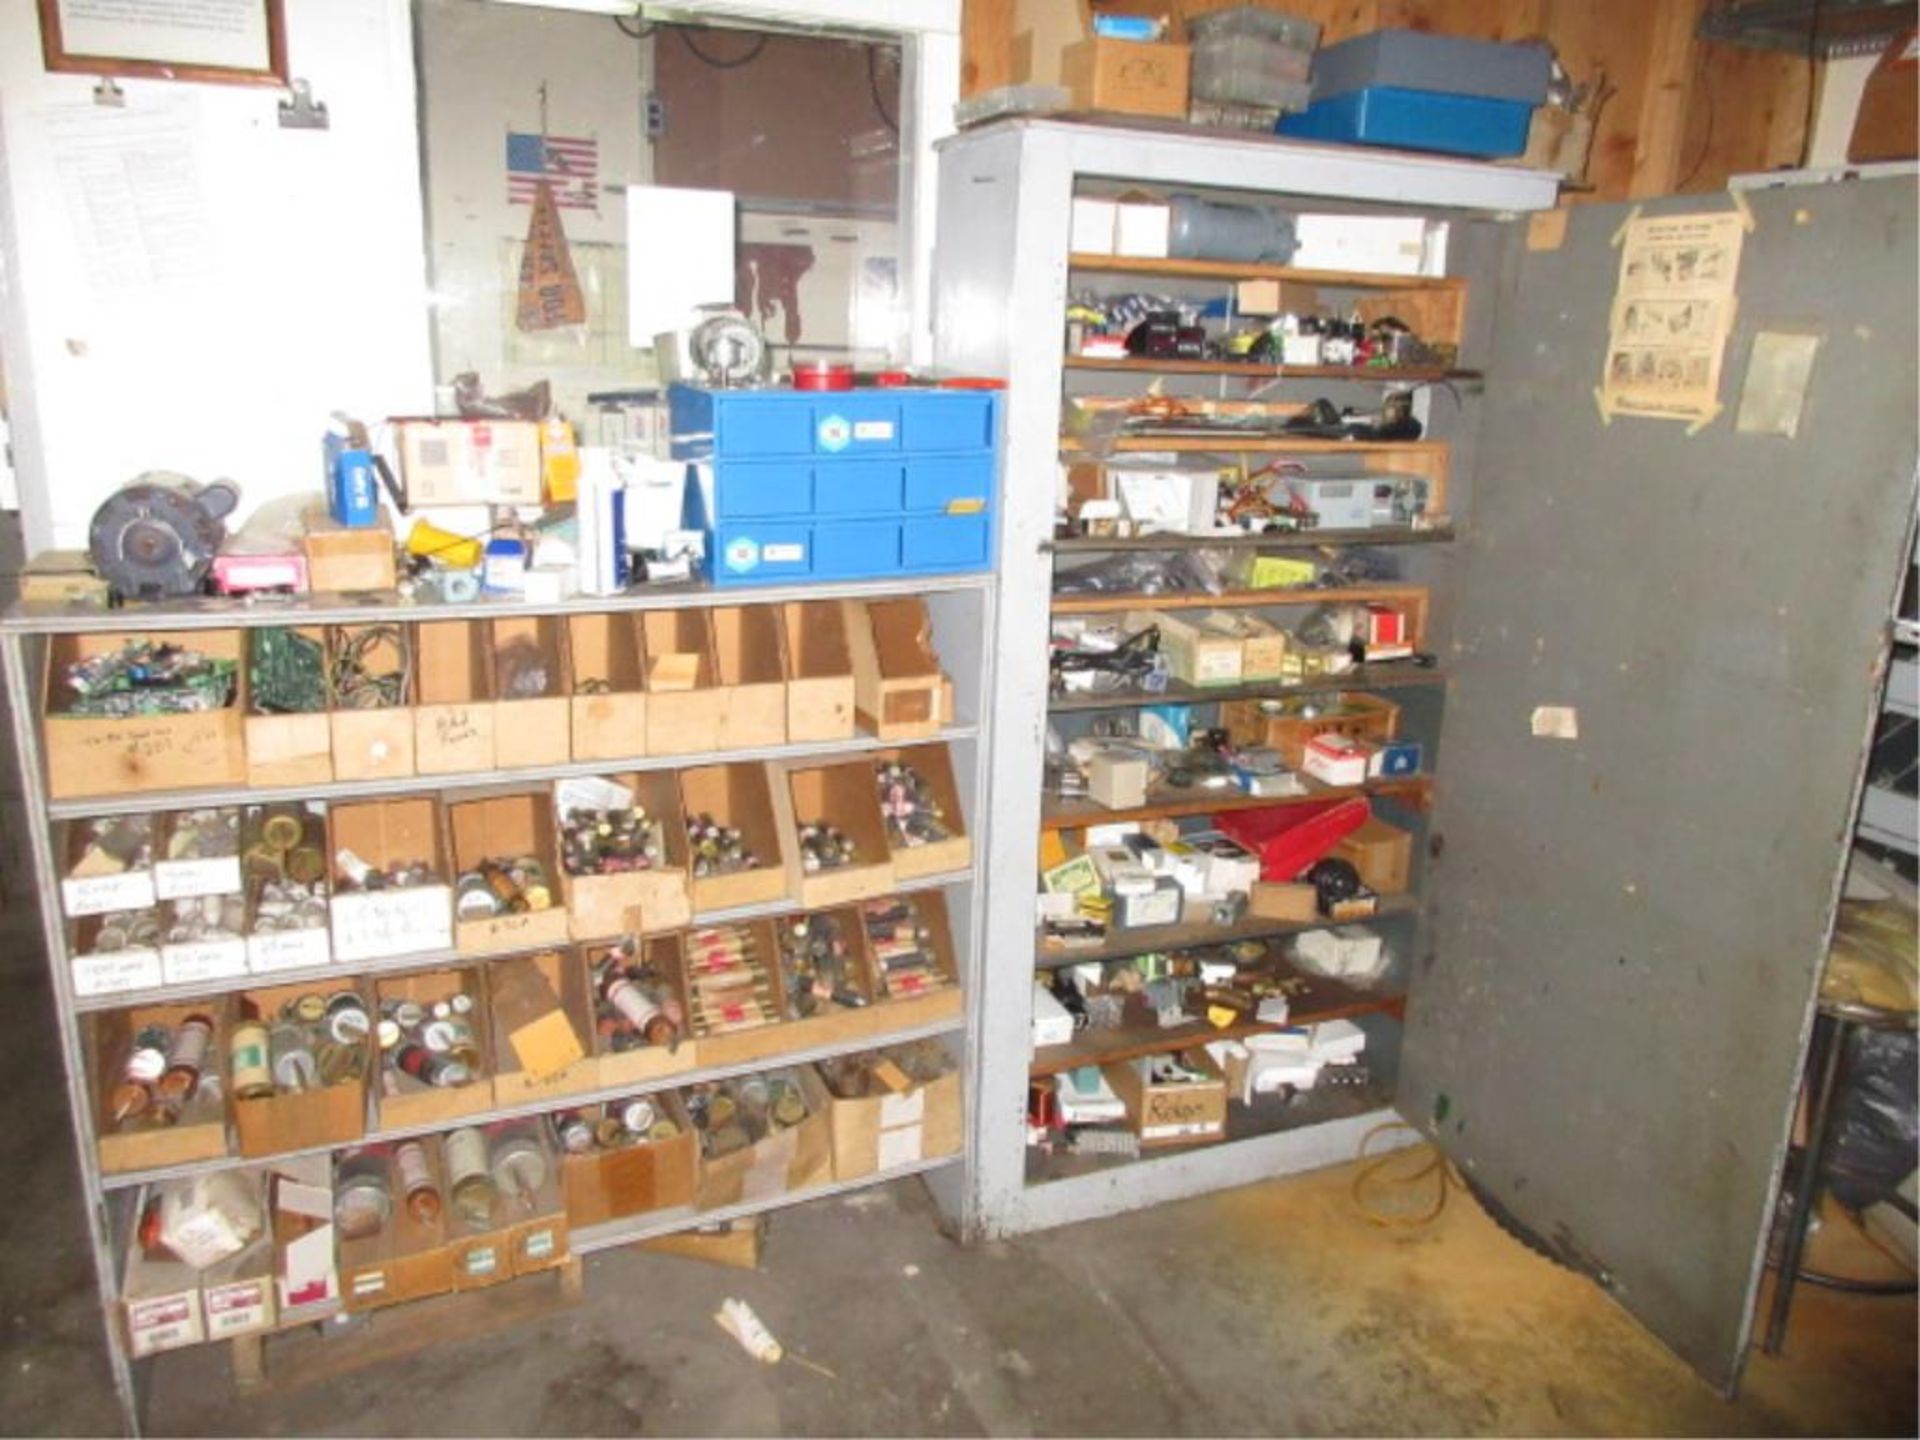 Lot Contents of Electrical Shop, includes cabinets, contents, conduit, etc. in three rooms. - Image 9 of 17